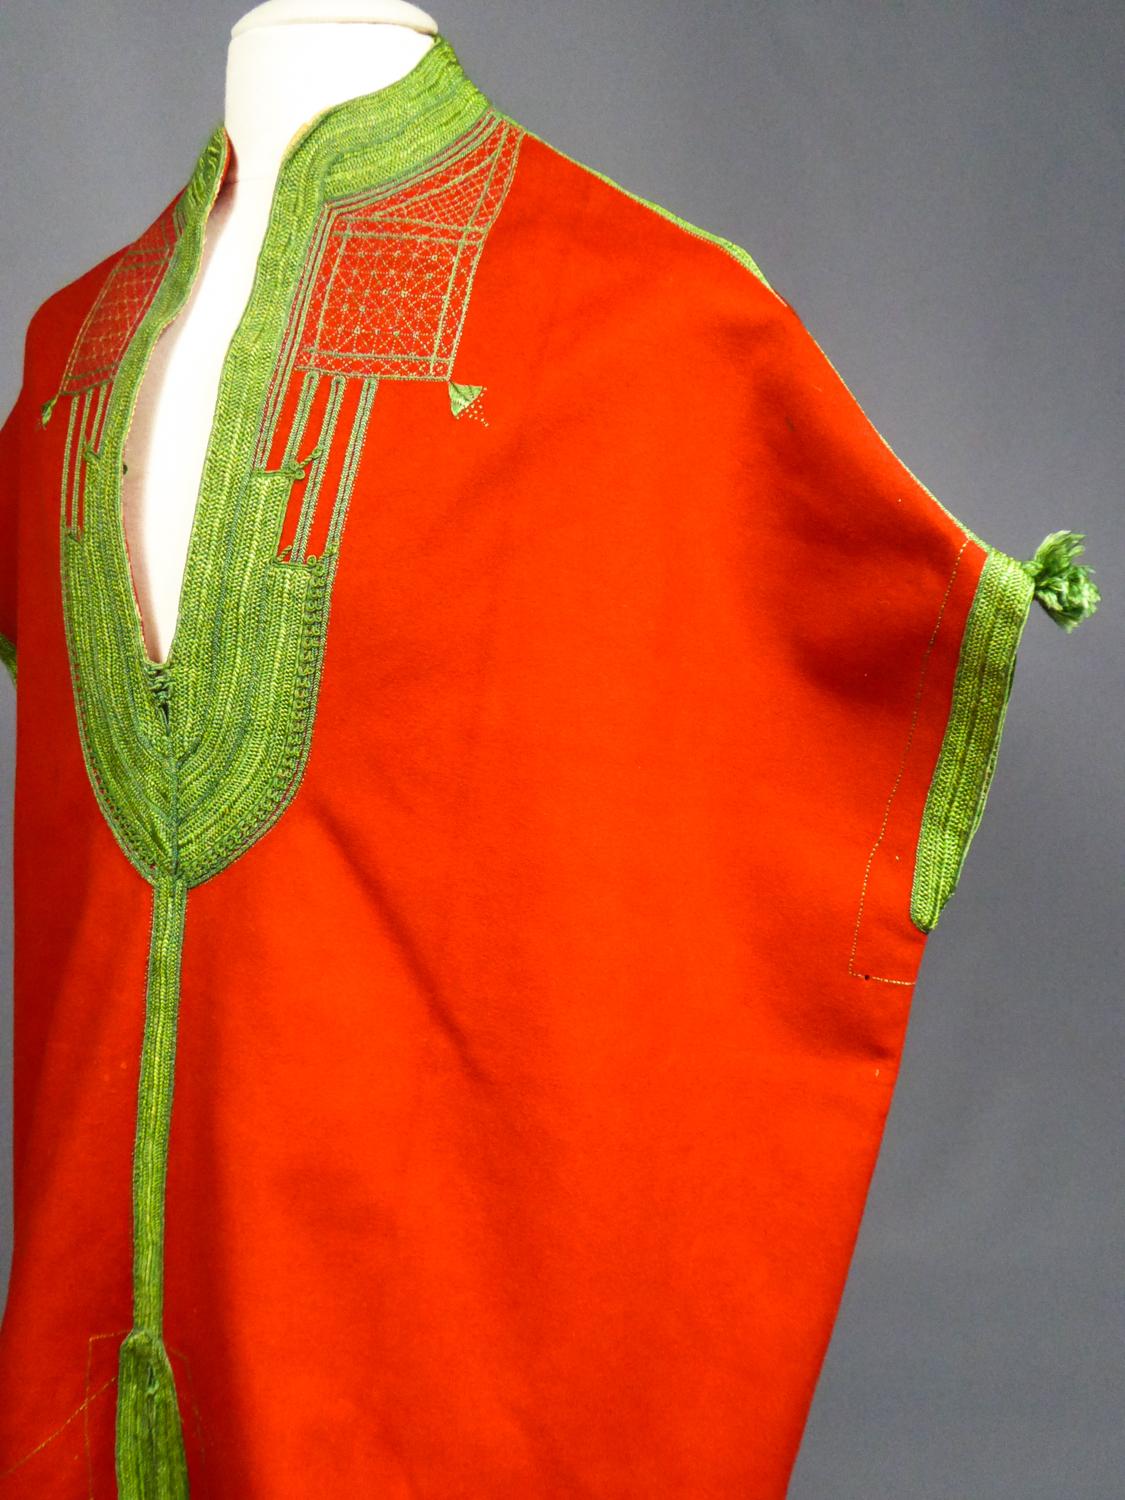 Red A Ceremonial Jebba Tunic in Felt Embroidered with Silk - Tunisia Circa 1900/1950 For Sale